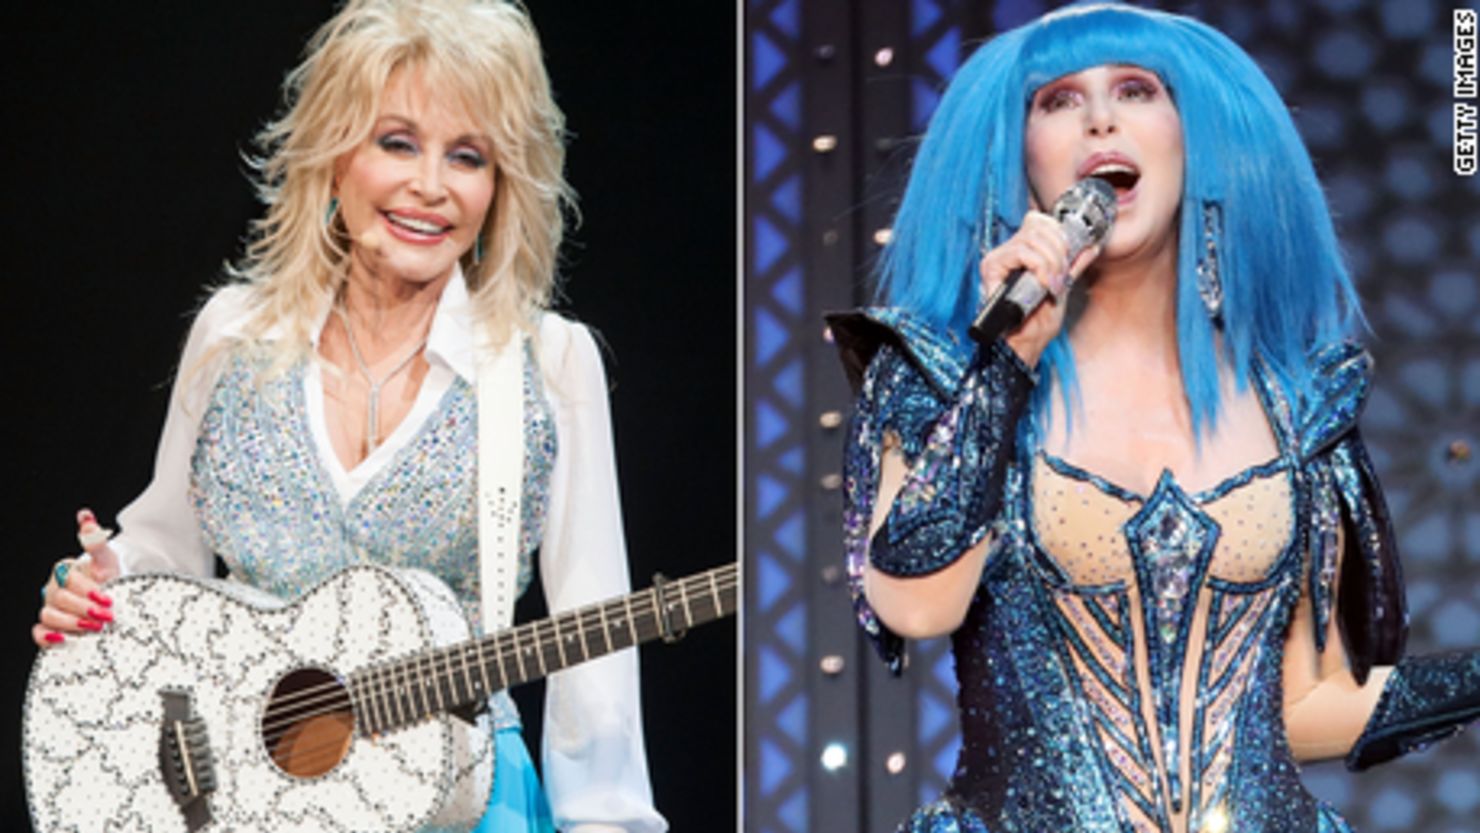 Left - RANCHO MIRAGE, CA - JANUARY 24: Singer Dolly Parton Performs at Agua Caliente Casino on January 24, 2014 in Rancho Mirage, California. (Photo by Valerie Macon/Getty Images)

Right - NEW YORK, NEW YORK - DECEMBER 04: Cher performs at Madison Square Garden on December 04, 2019 in New York City. (Photo by Taylor Hill/Getty Images)